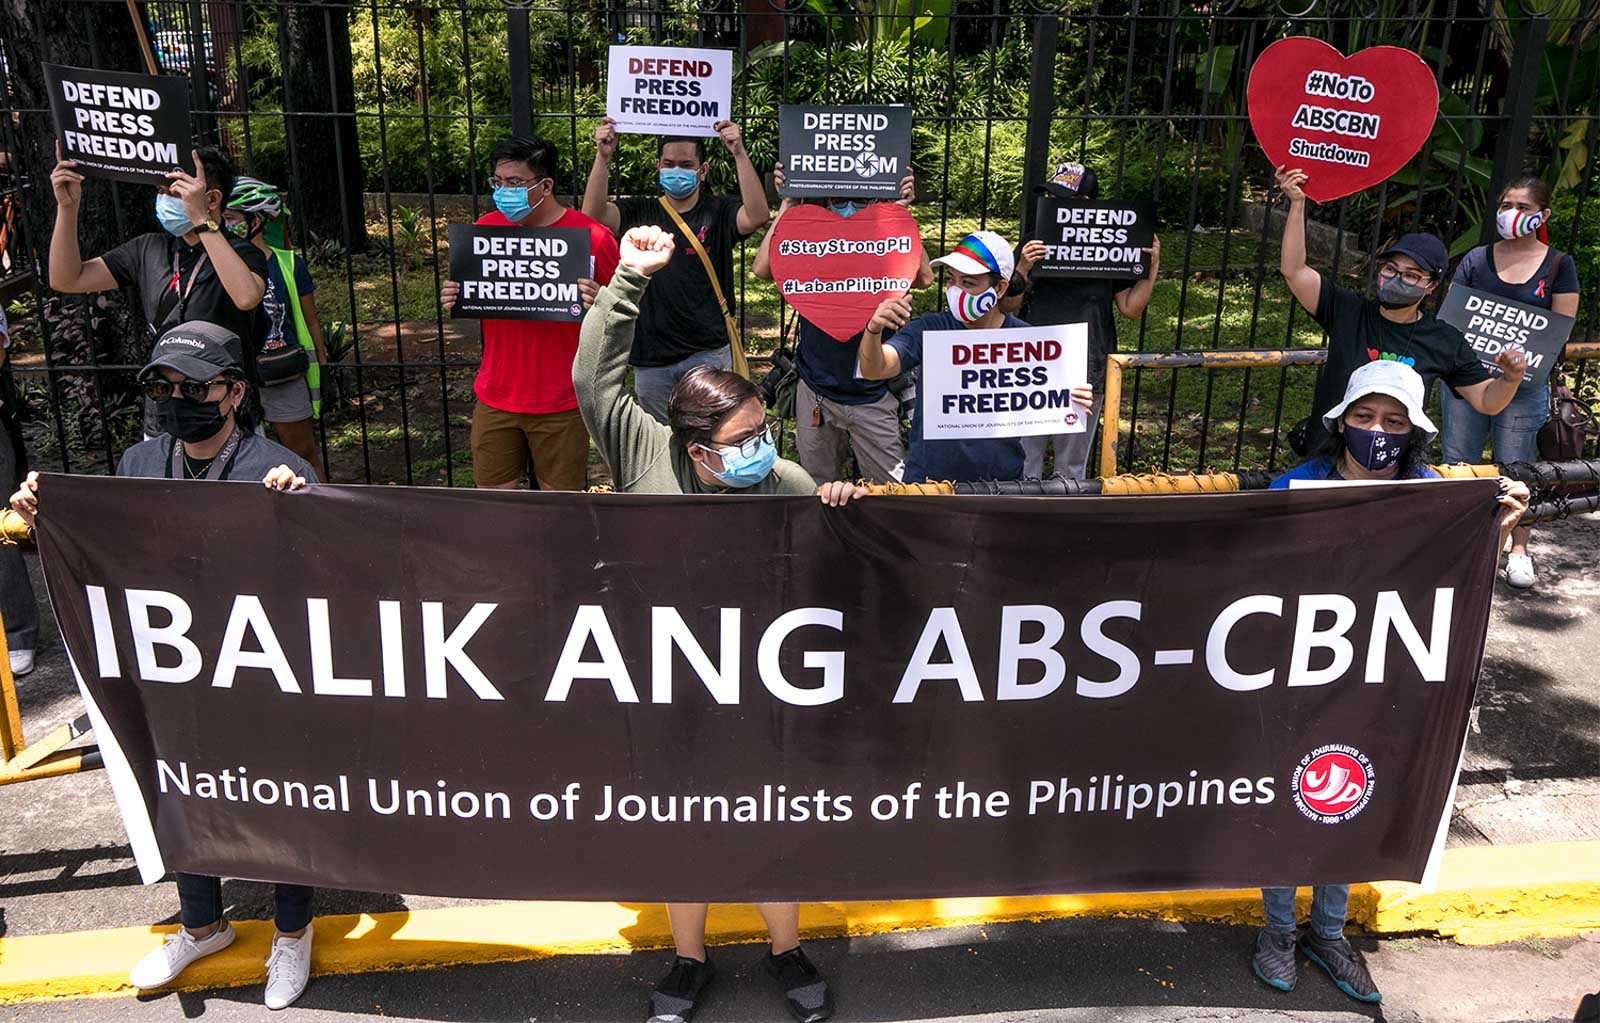 Darker days ahead: Rights groups slam rejection of ABS-CBN franchise